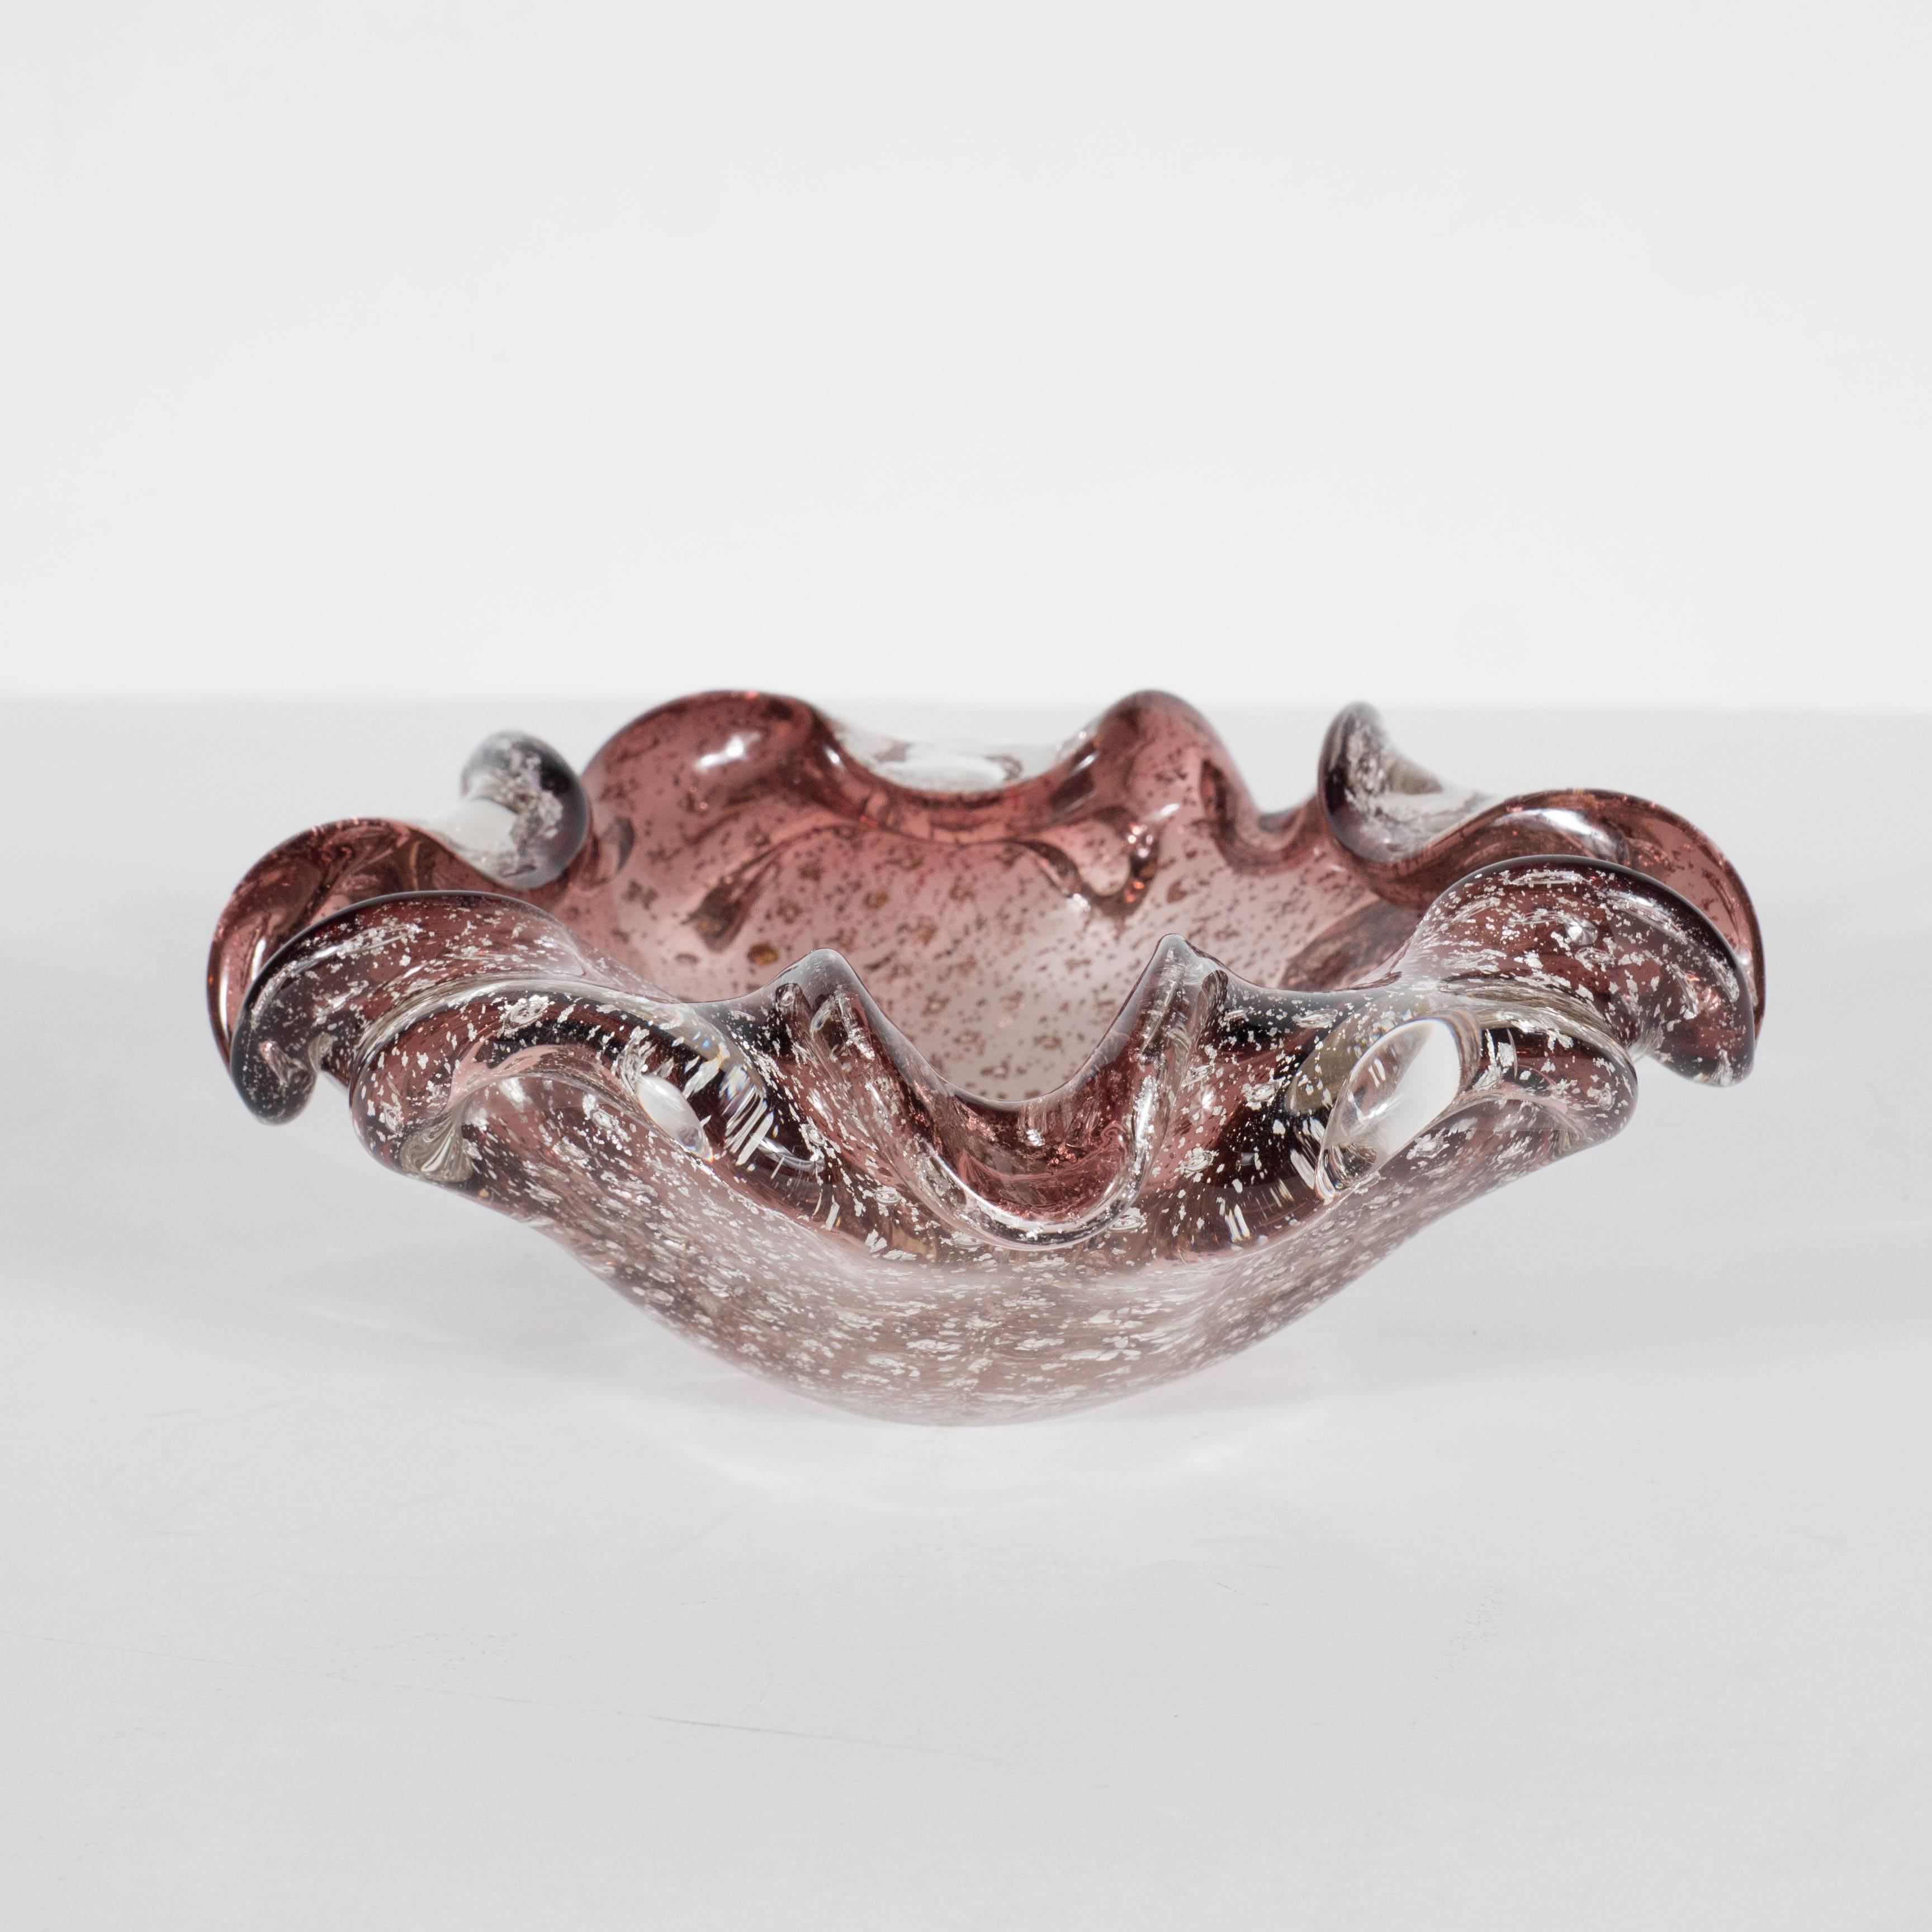 Mid-Century Modern striking and very unusual foliate mauve Murano bowl or ashtray, Italy, circa 1950 reminiscent of some rare under water plant or flower, in handblown mauve Murano glass with 24-karat white gold inclusions.
Italy, circa 1950